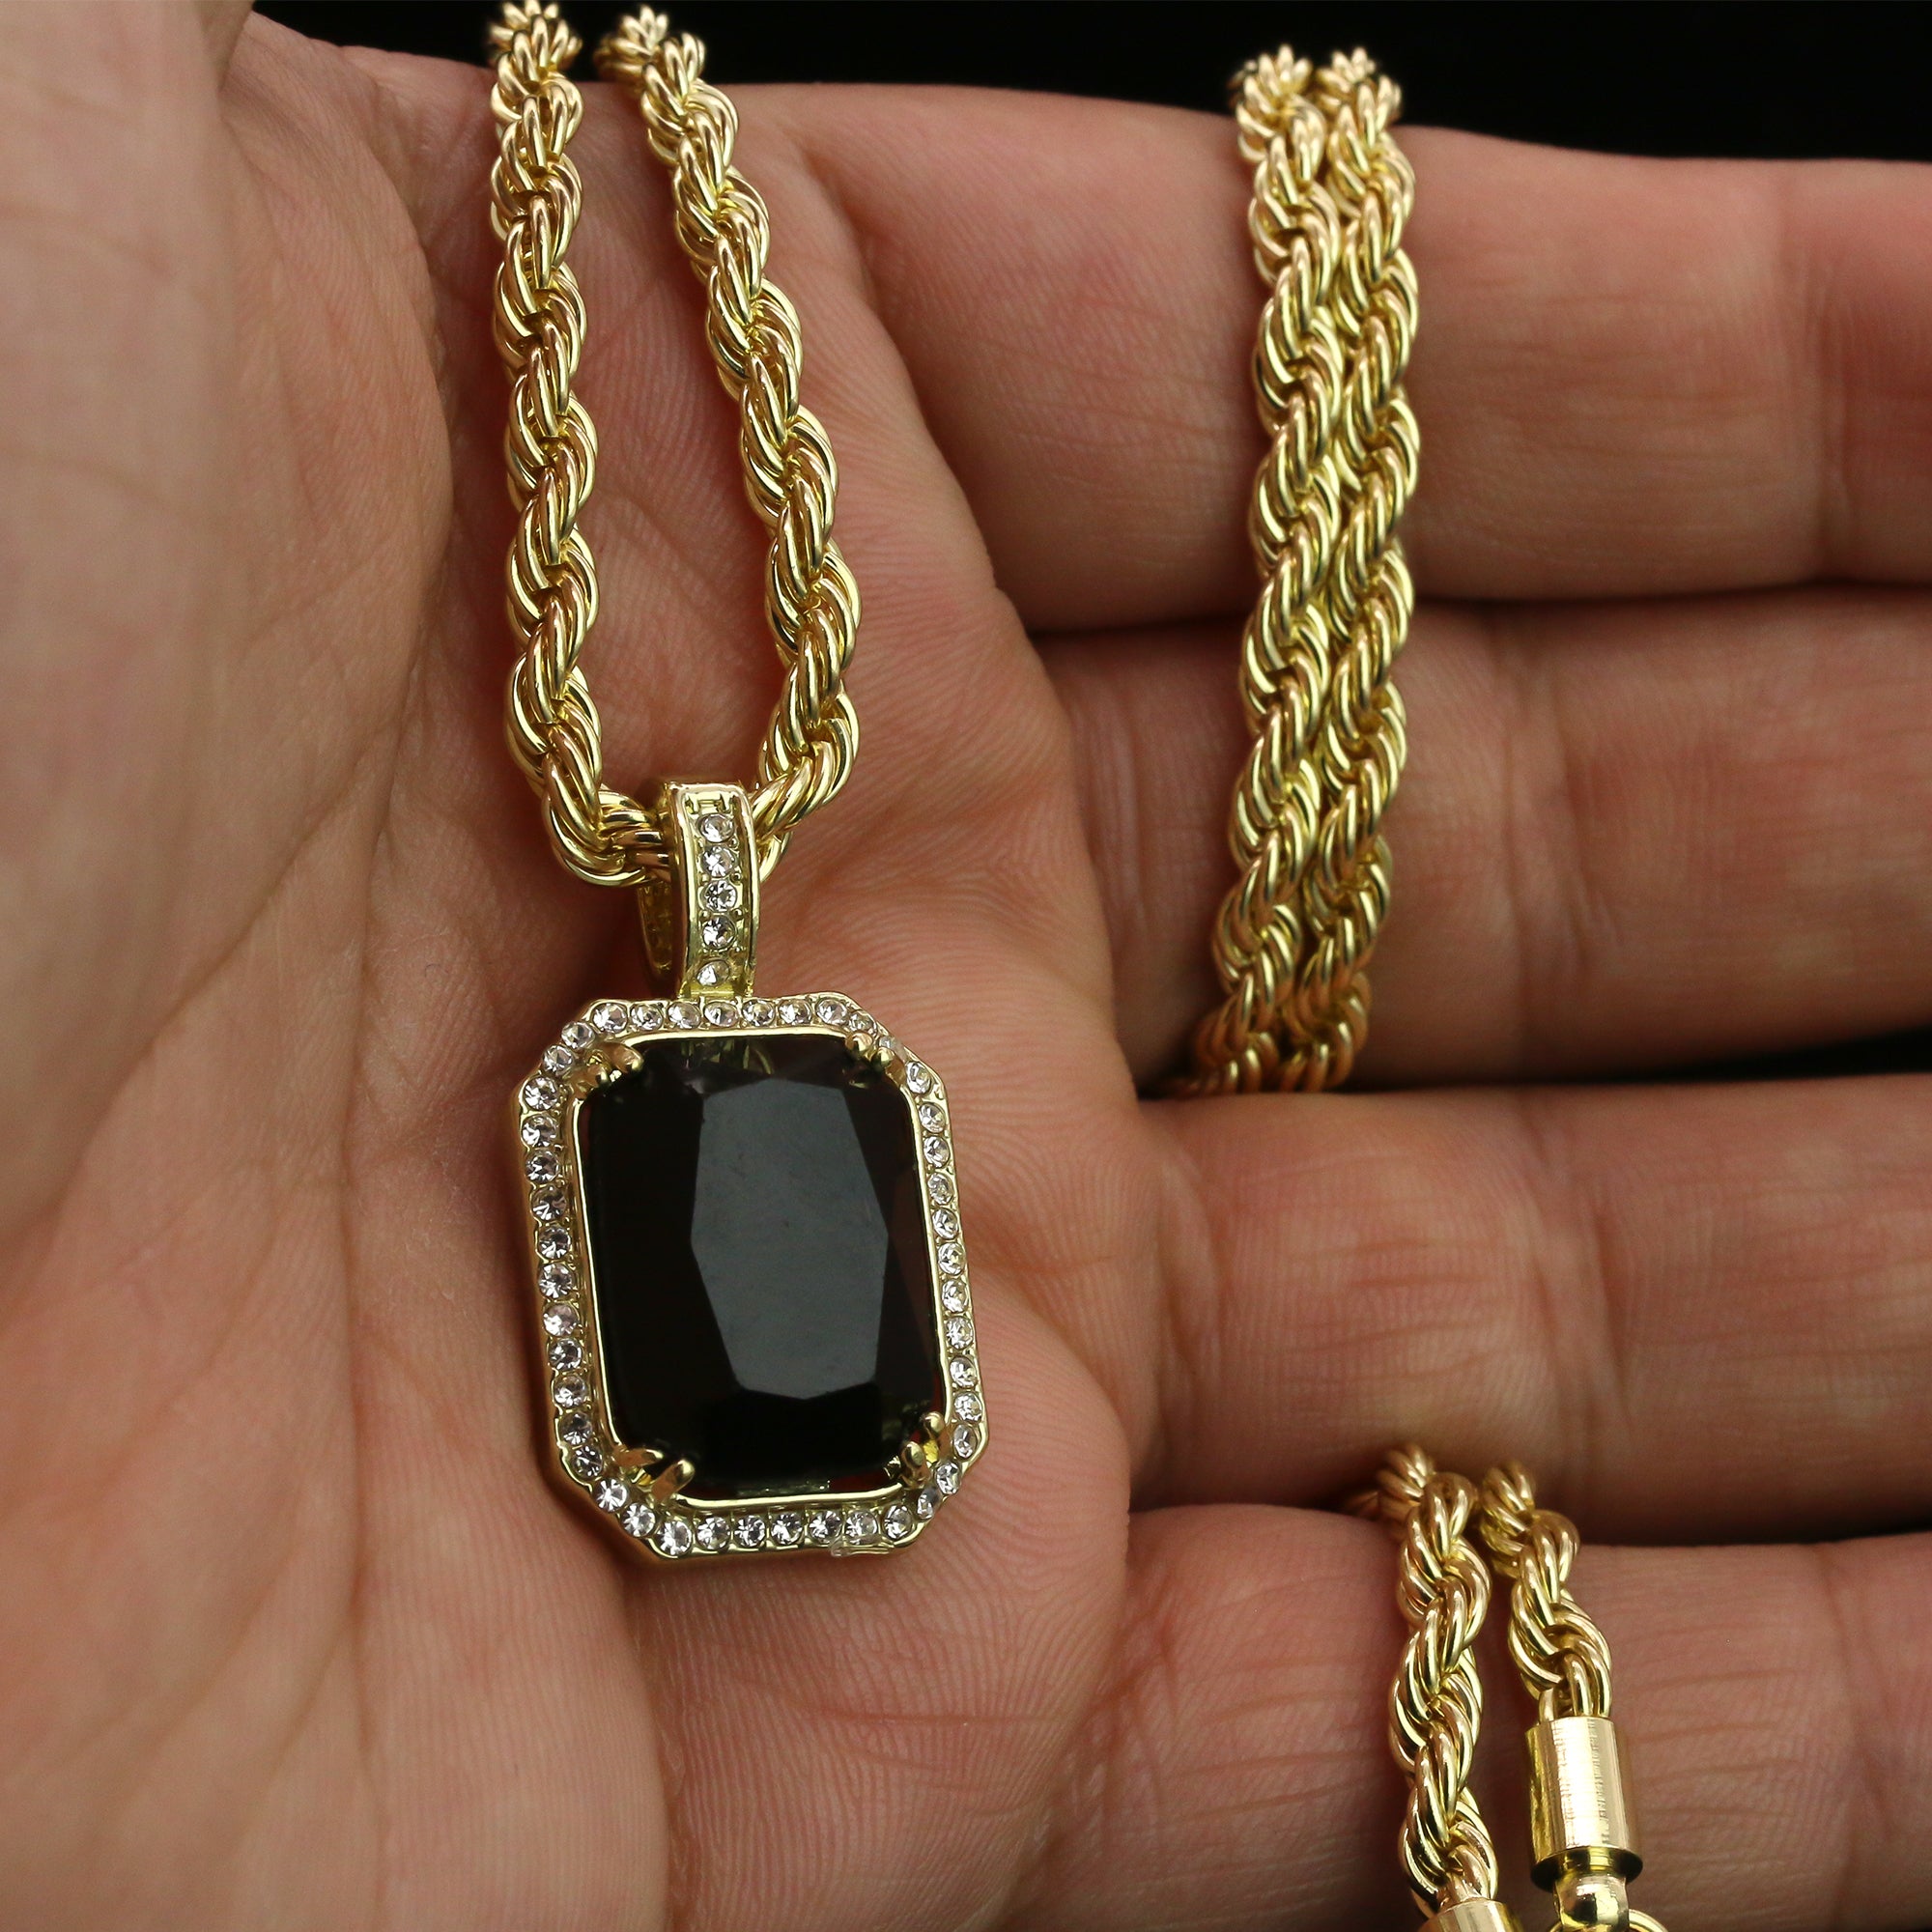 Cz Small Black Ruby Pendant 24" Rope Chain Hip Hop 18k Jewelry Necklace